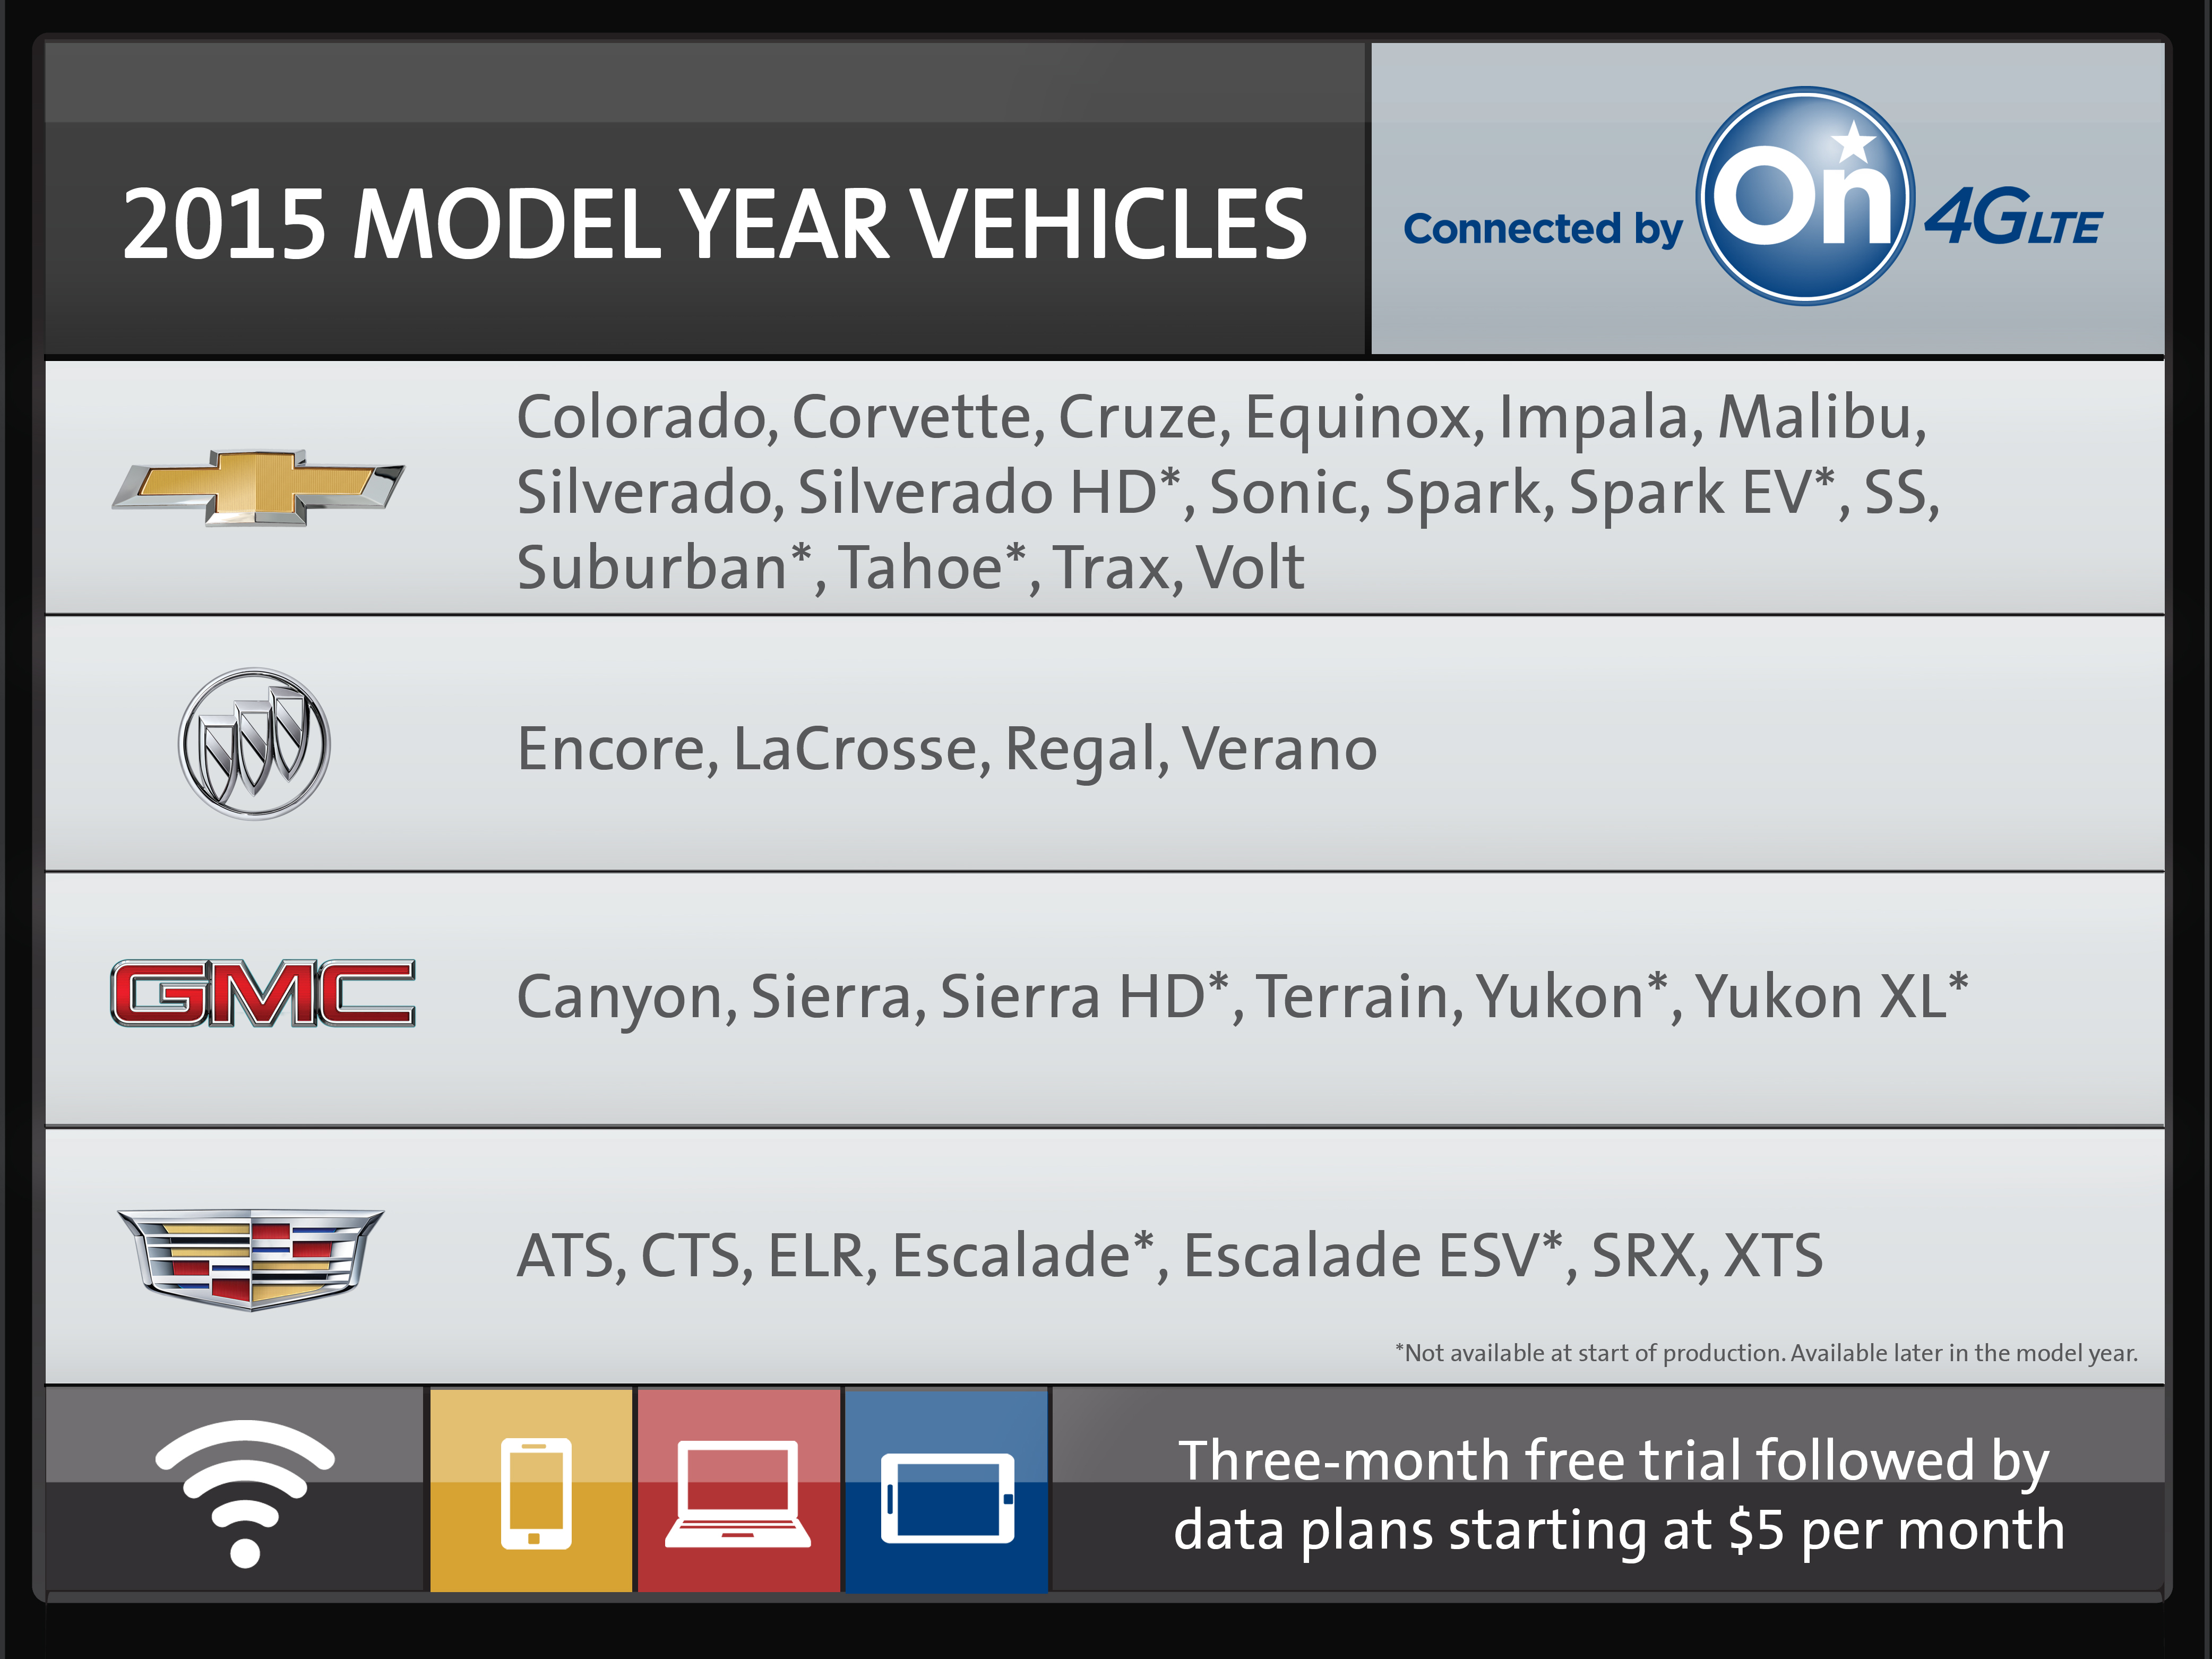 Hands On Gm Brings Lte To The Majority Of Its Lineup With Onstar 4g